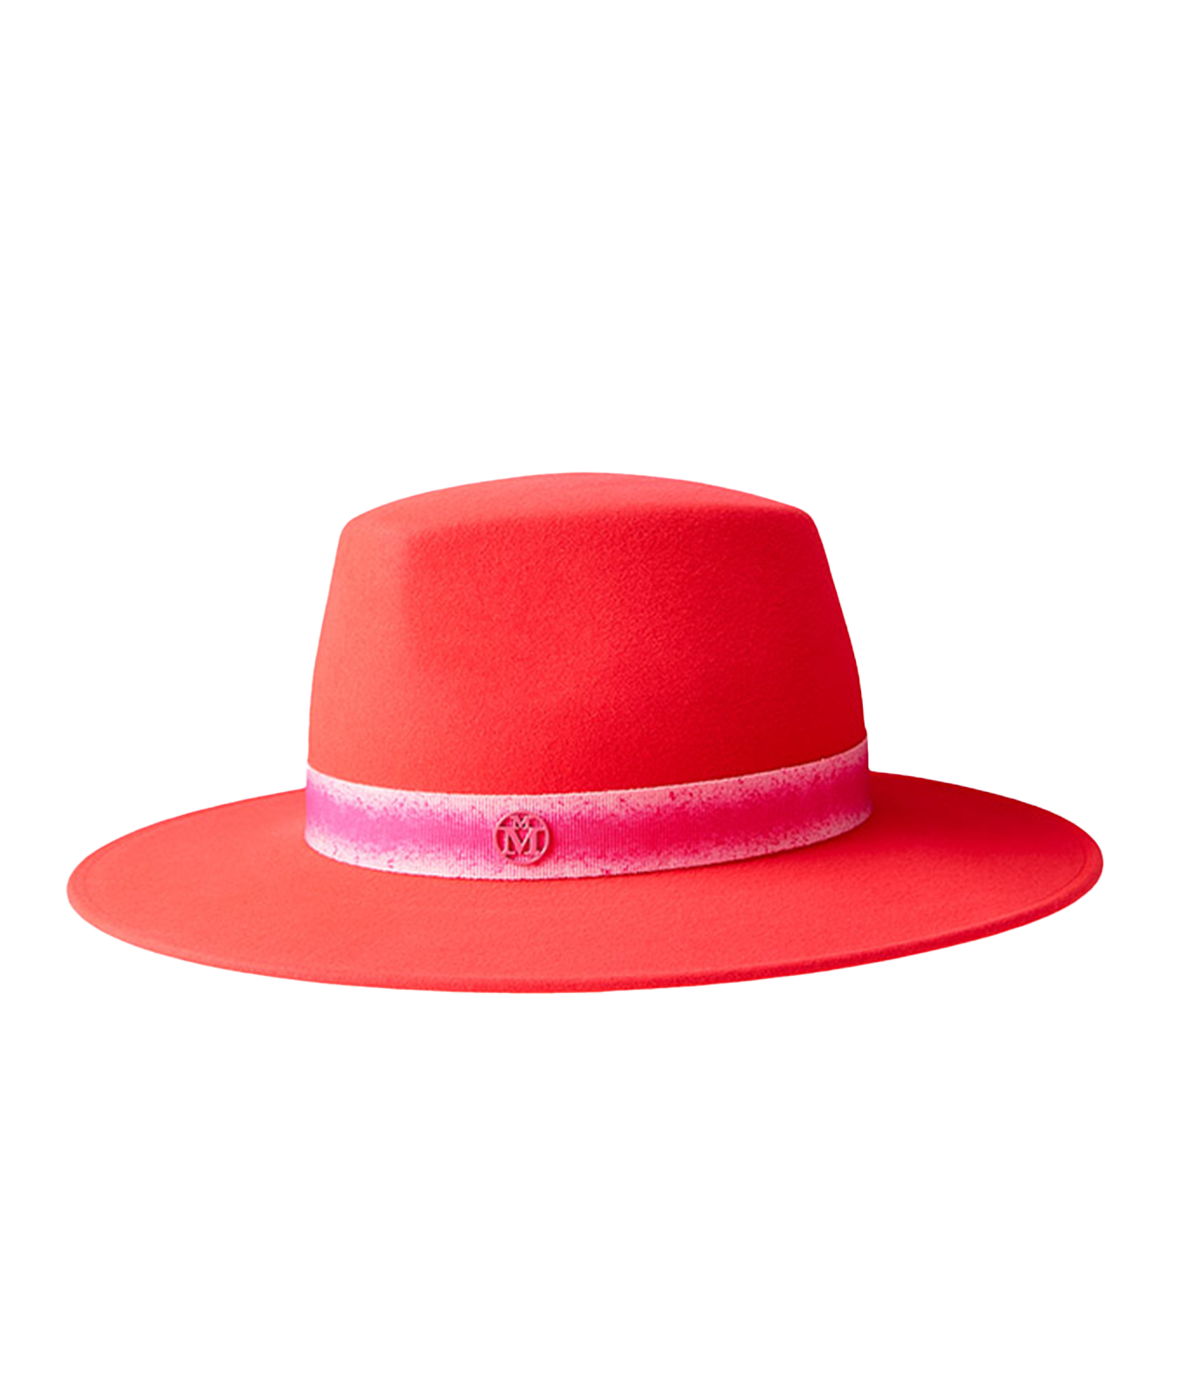 Kyra Hat in Pink Corail